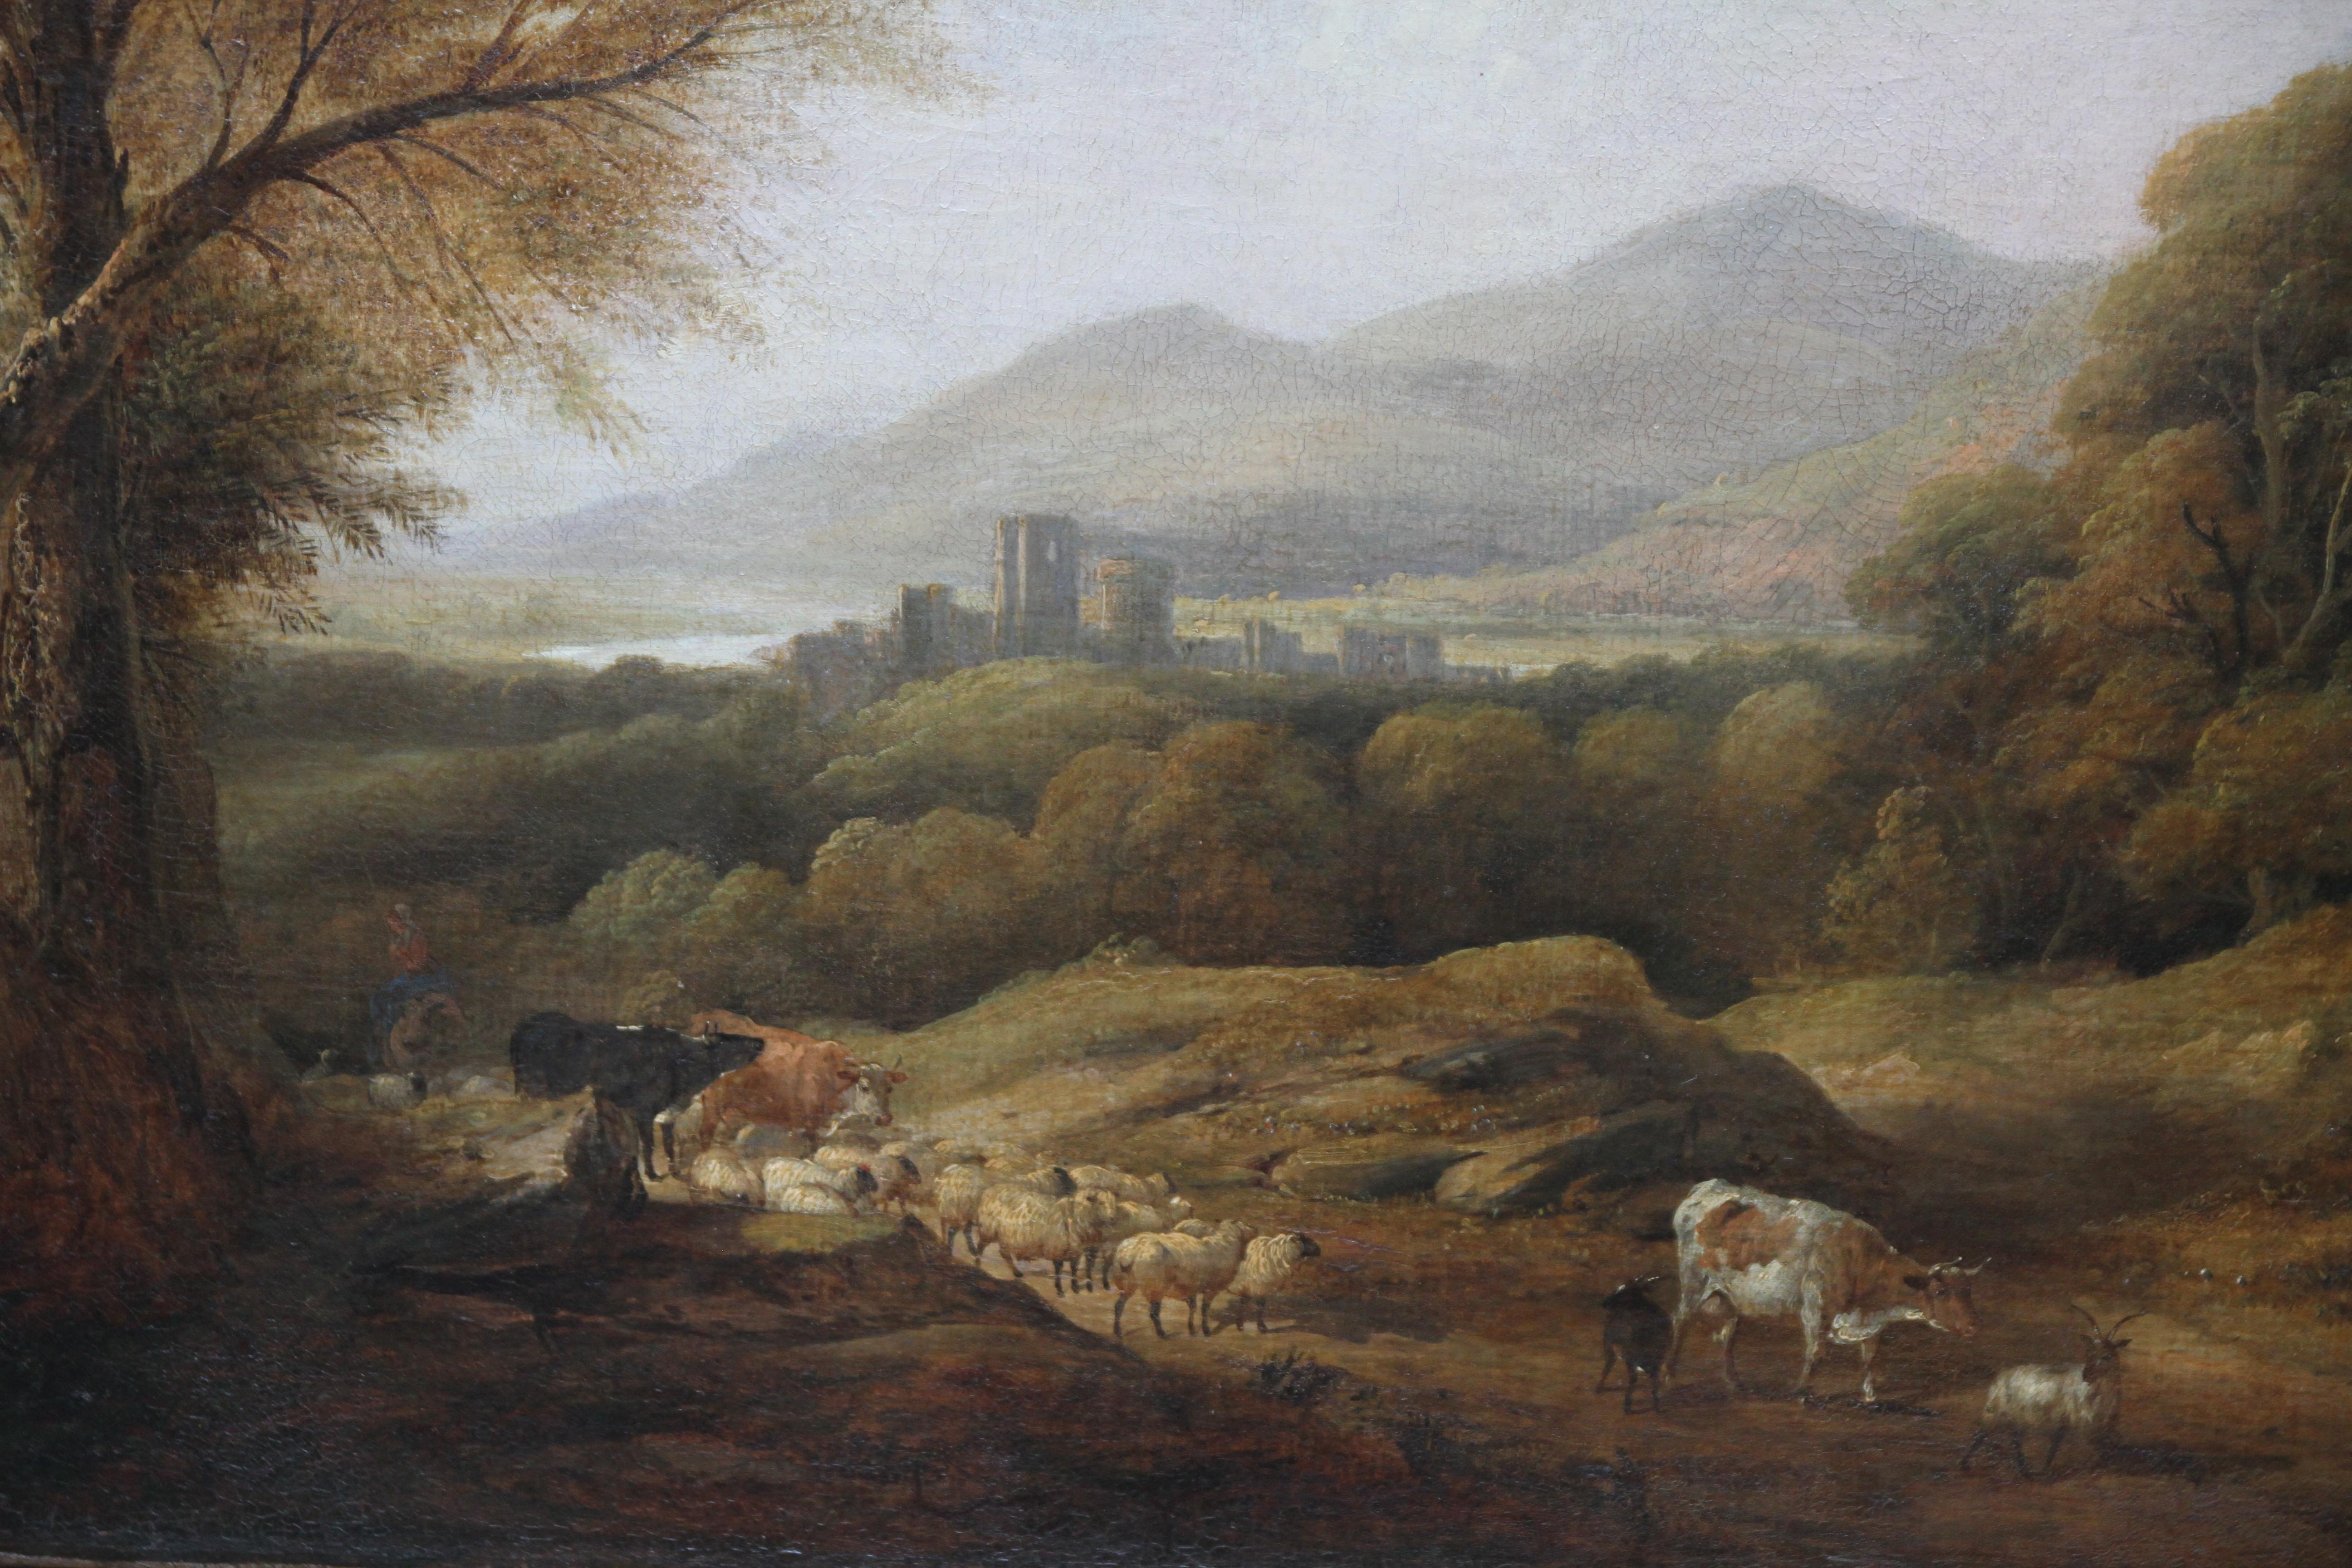 Cattle and Drover in a Landscape - British Victorian art landscape oil painting - Old Masters Painting by Henry Jutsum 